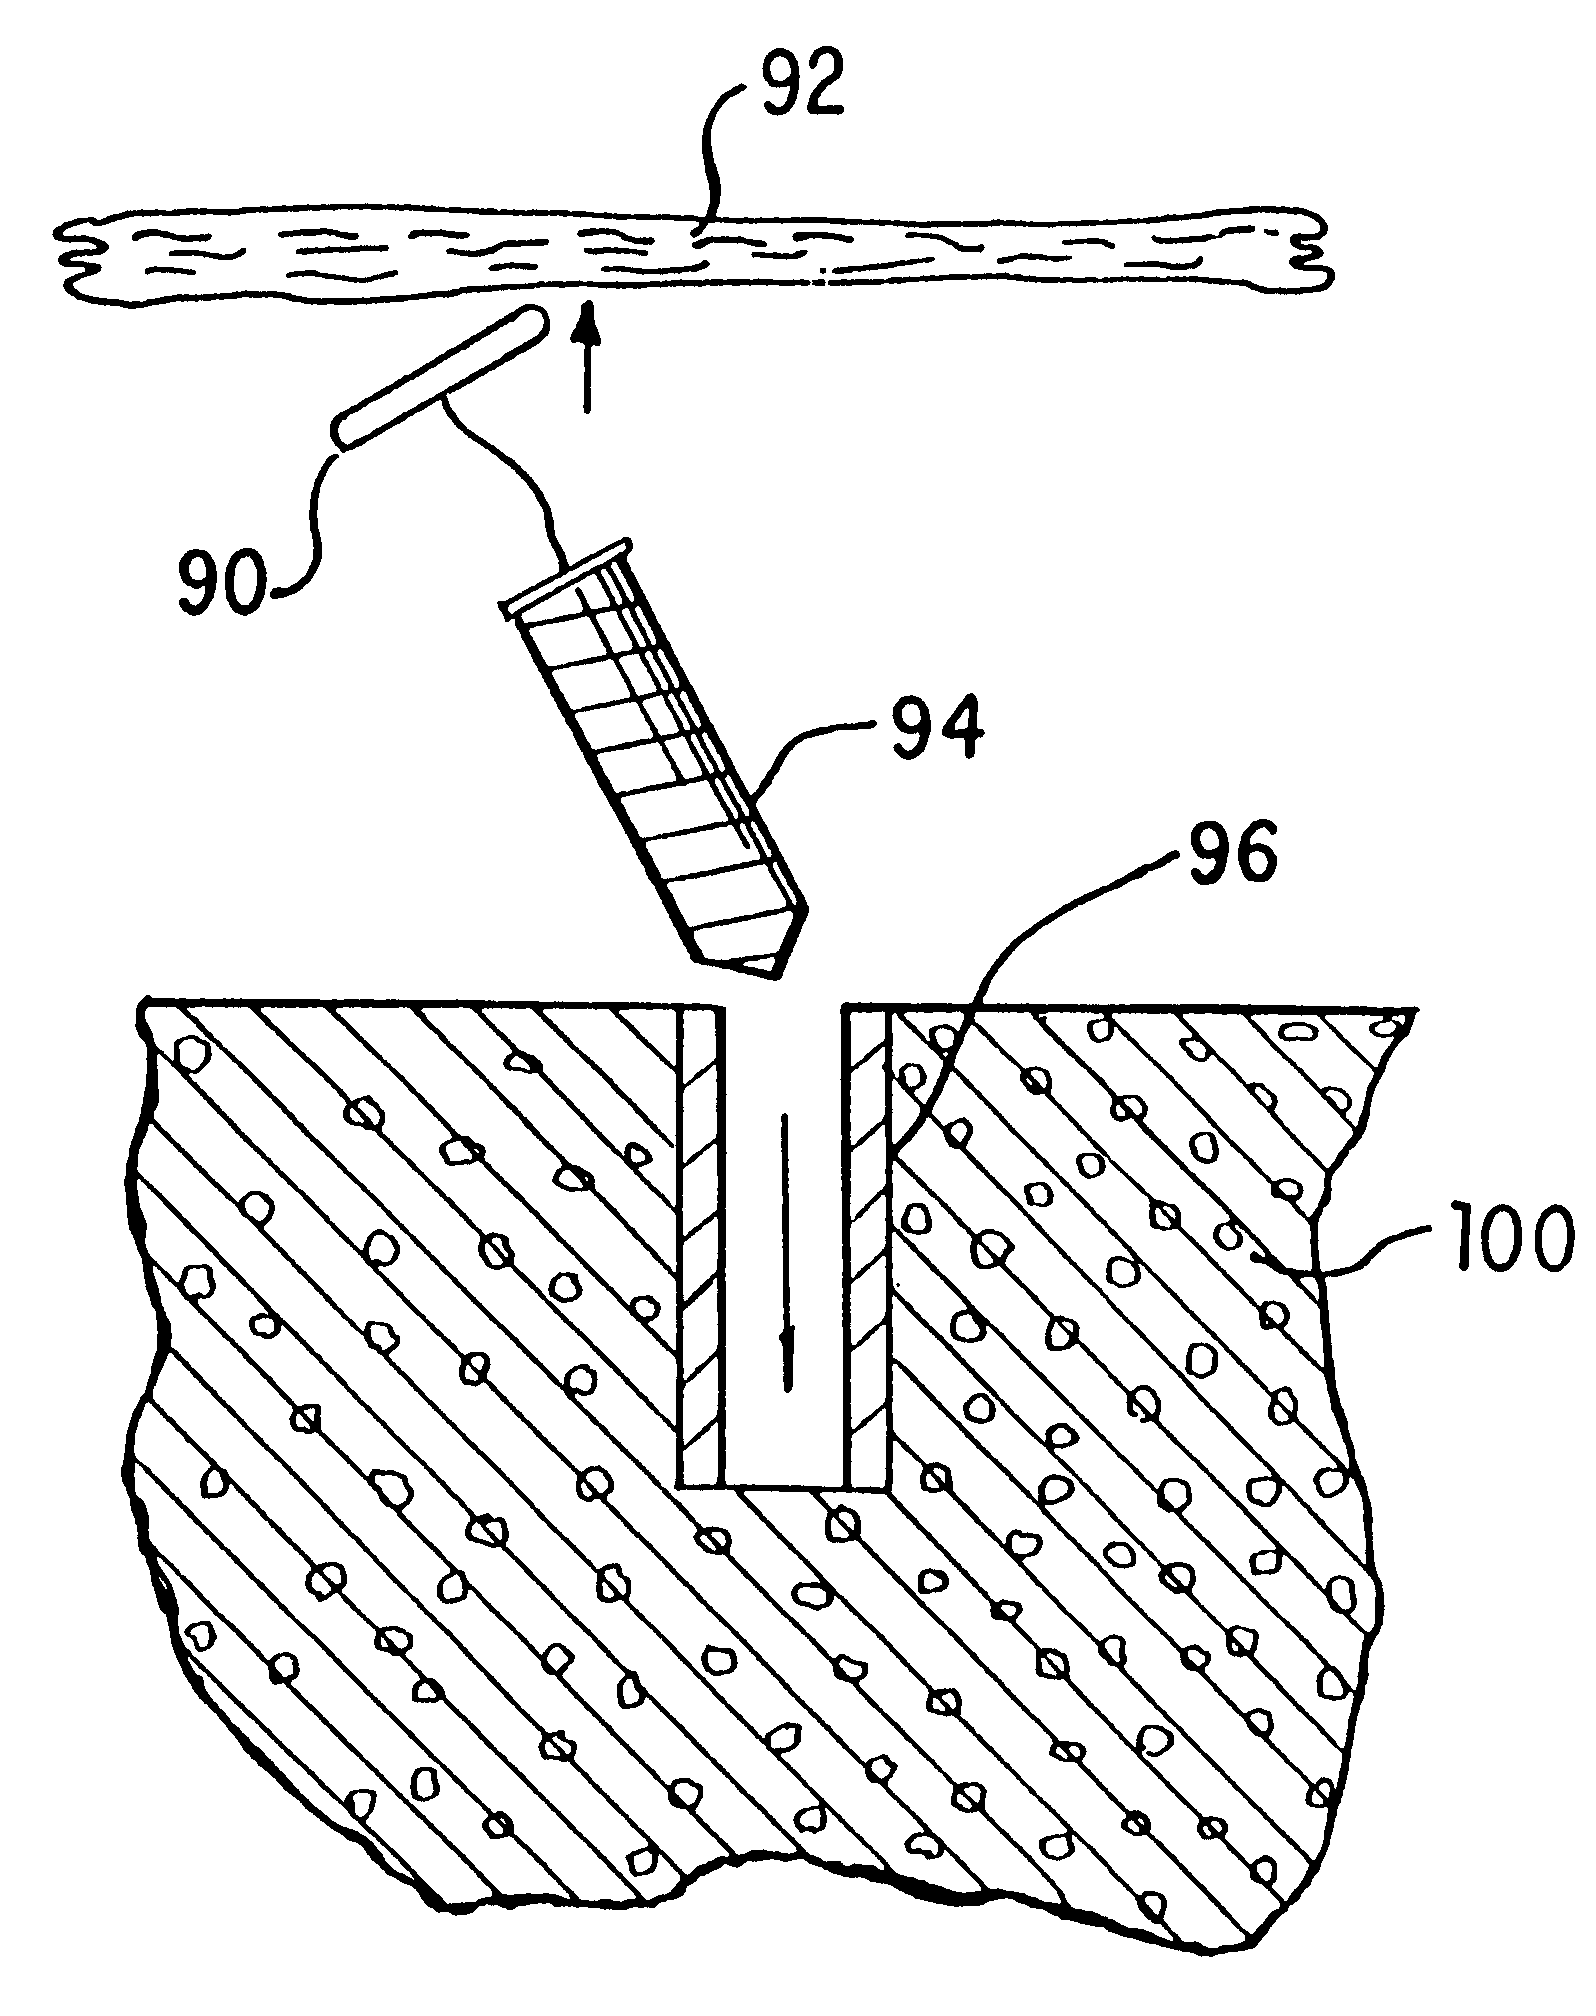 Knotless suture anchor assembly